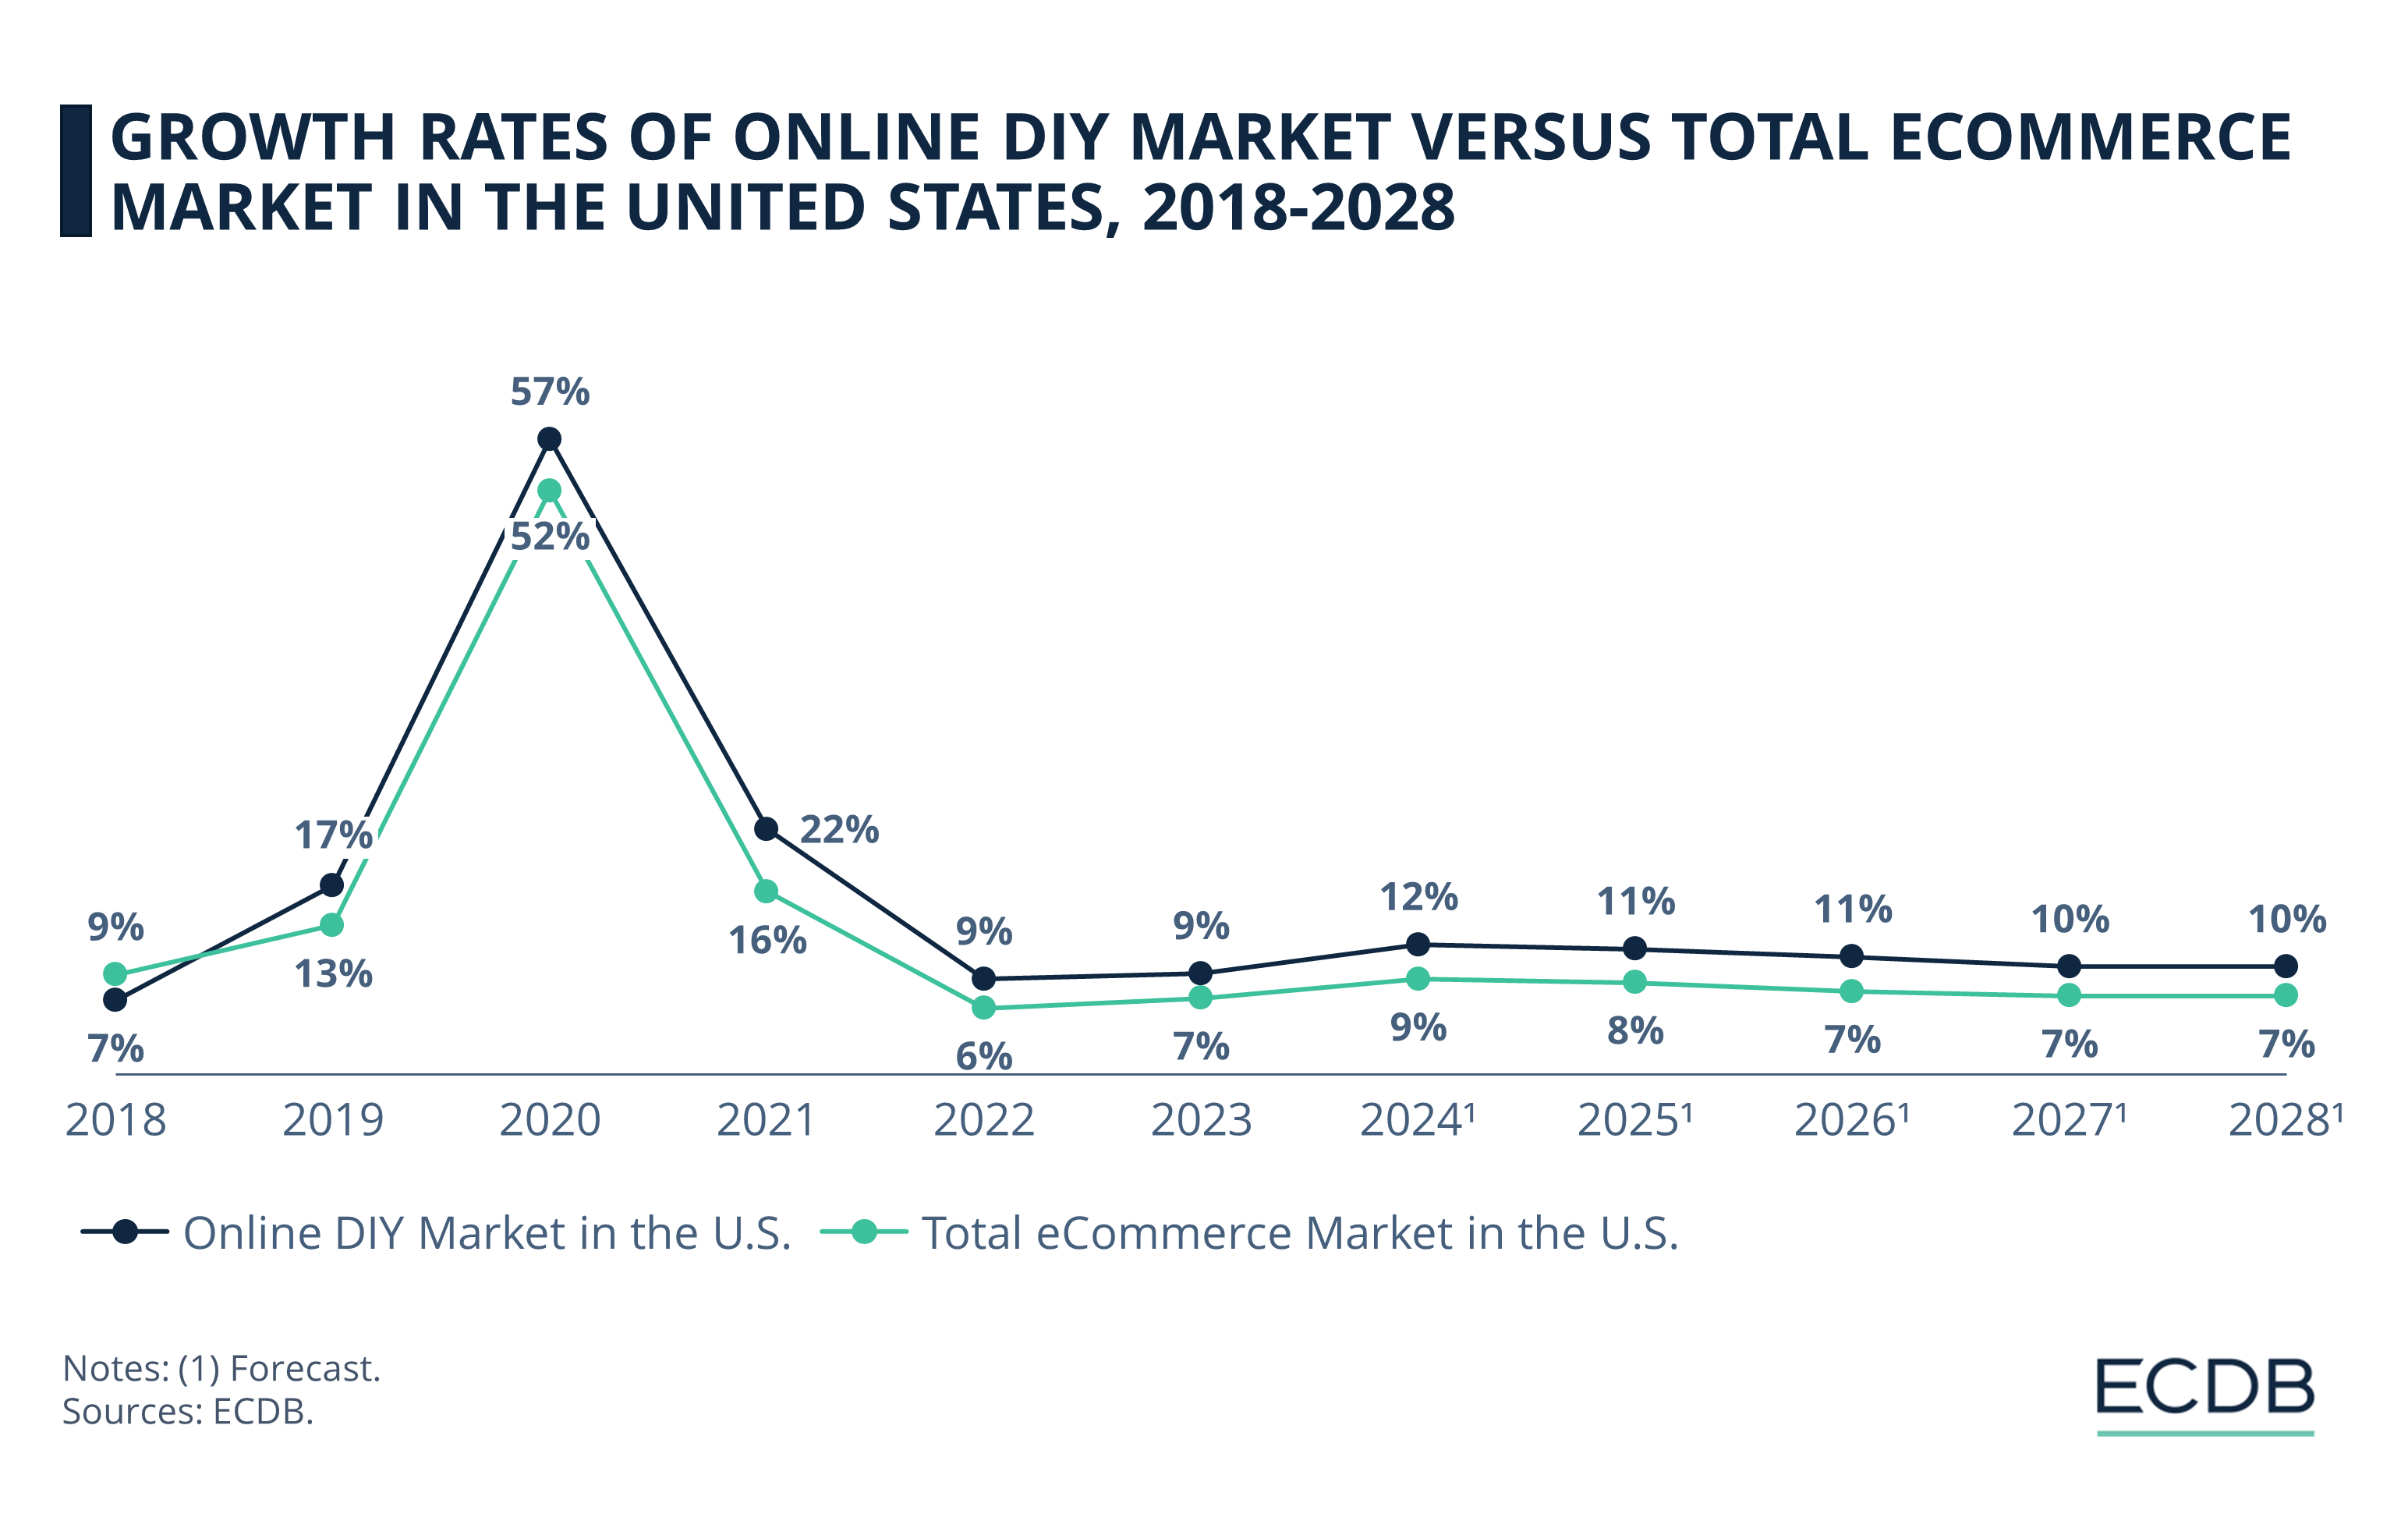 Growth Rates of Online DIY Market Versus Total eCommerce Market in the United States, 2018-2028